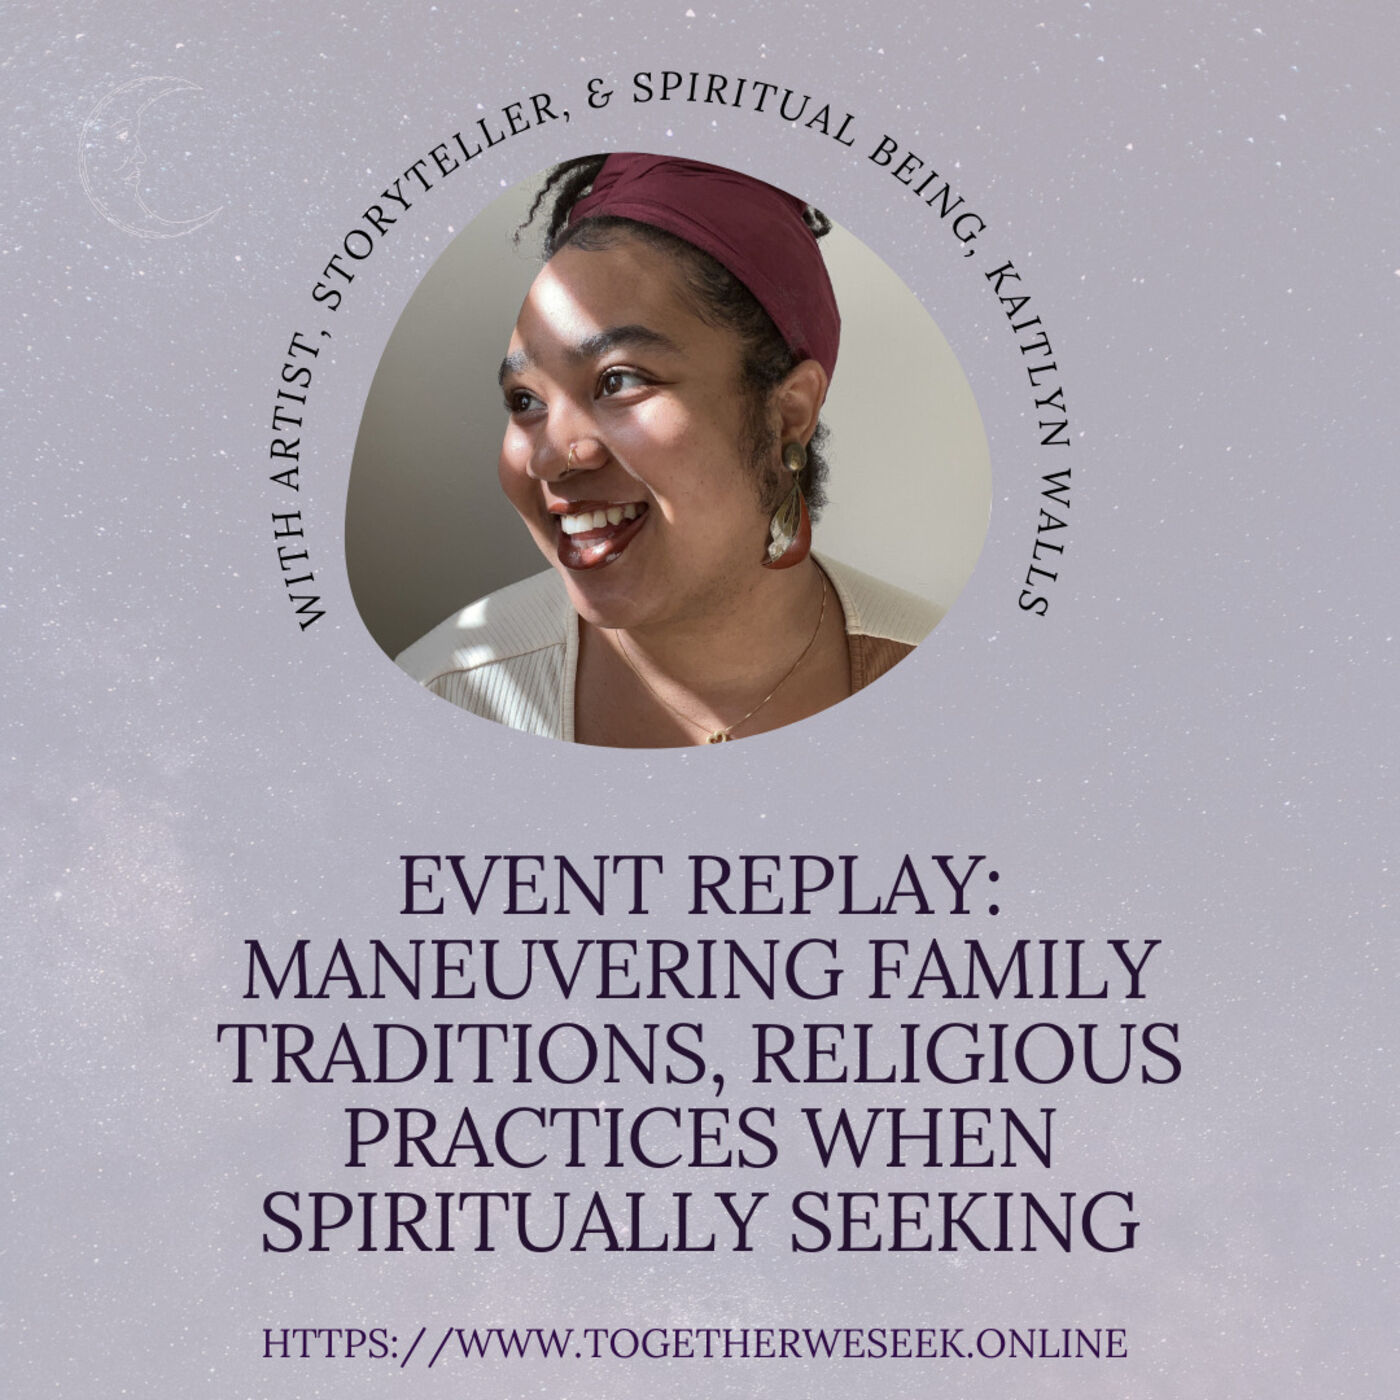 Spiritual Seeking – Maneuvering Family Traditions and Religious Practices